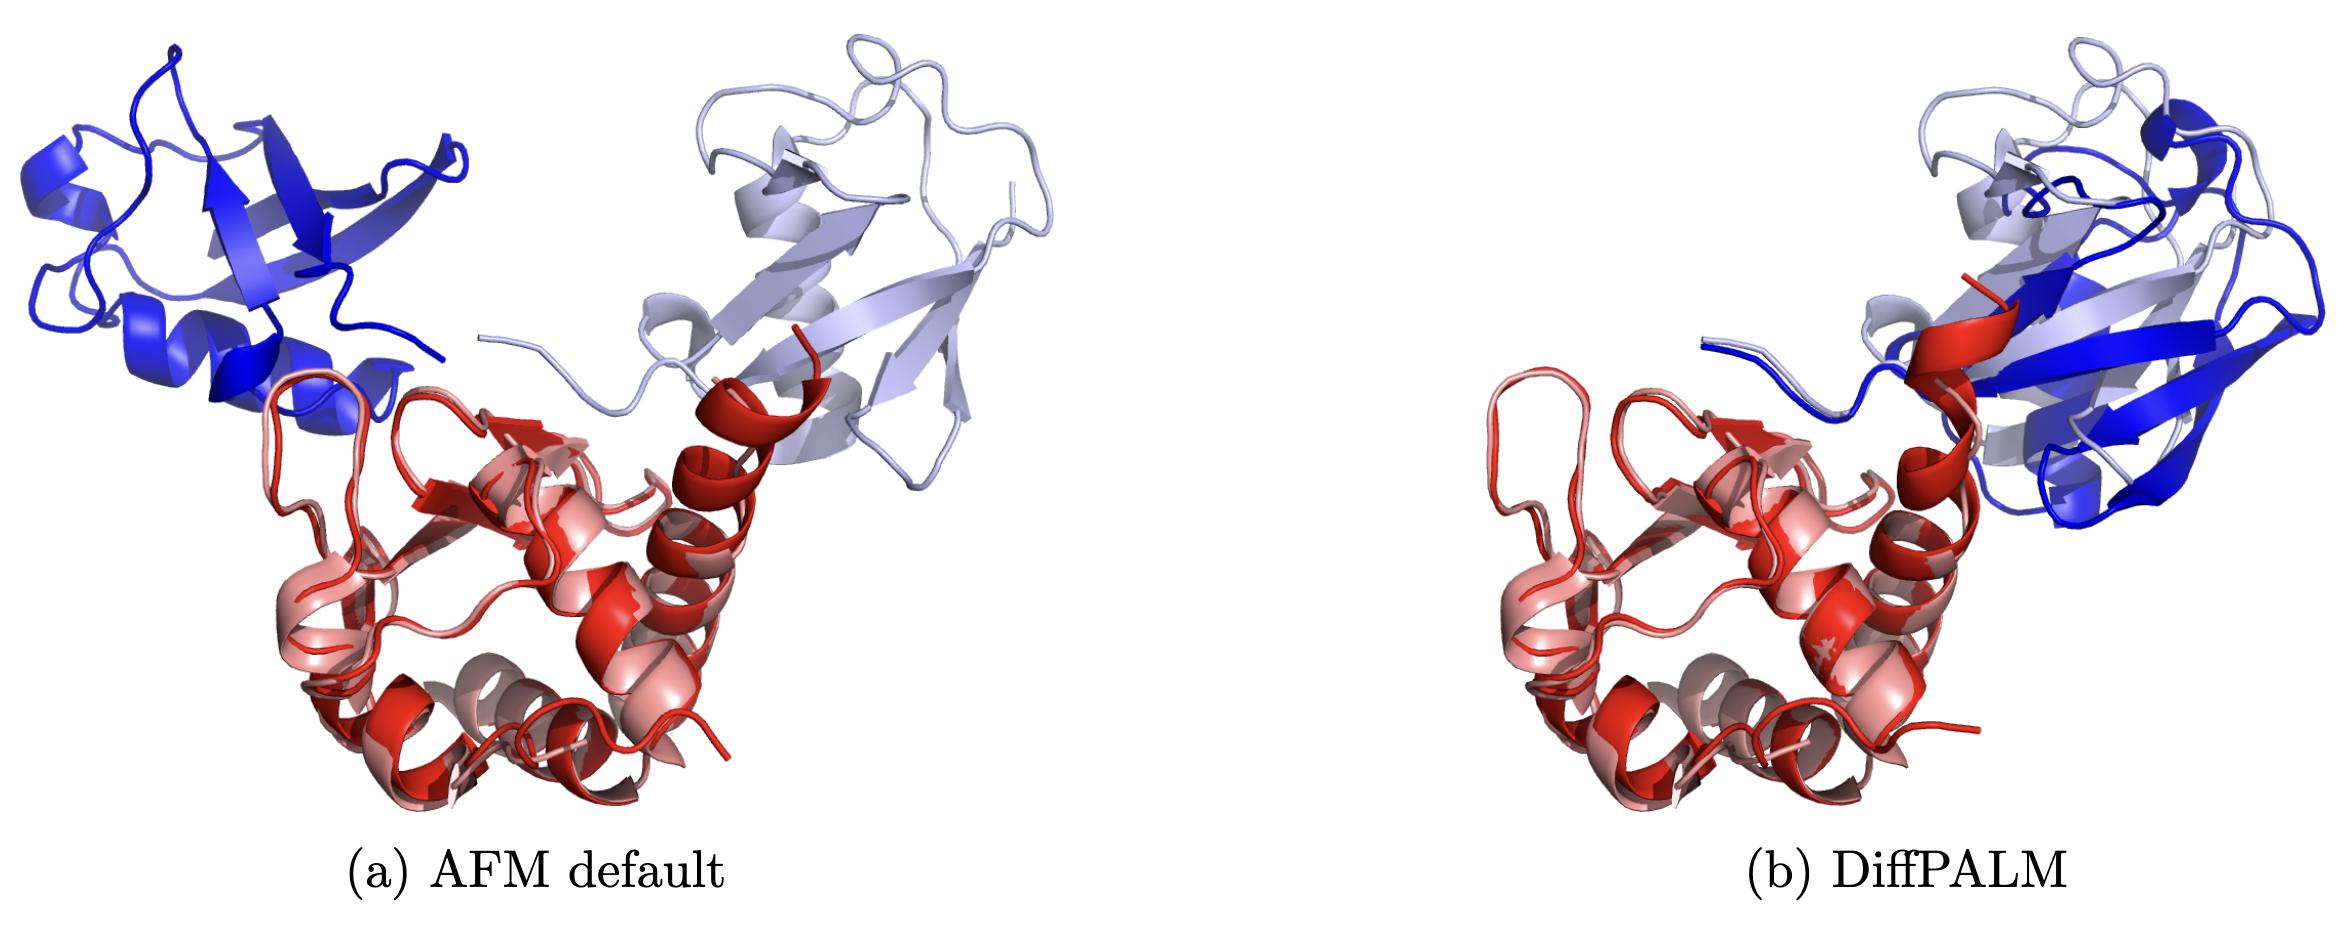 Comparing the AFM default MSA Transformer pairing strategy with DiffPALM for a protein structure. Credit: Lupo et al 2024, DOI: 10.1073/pnas.2311887121